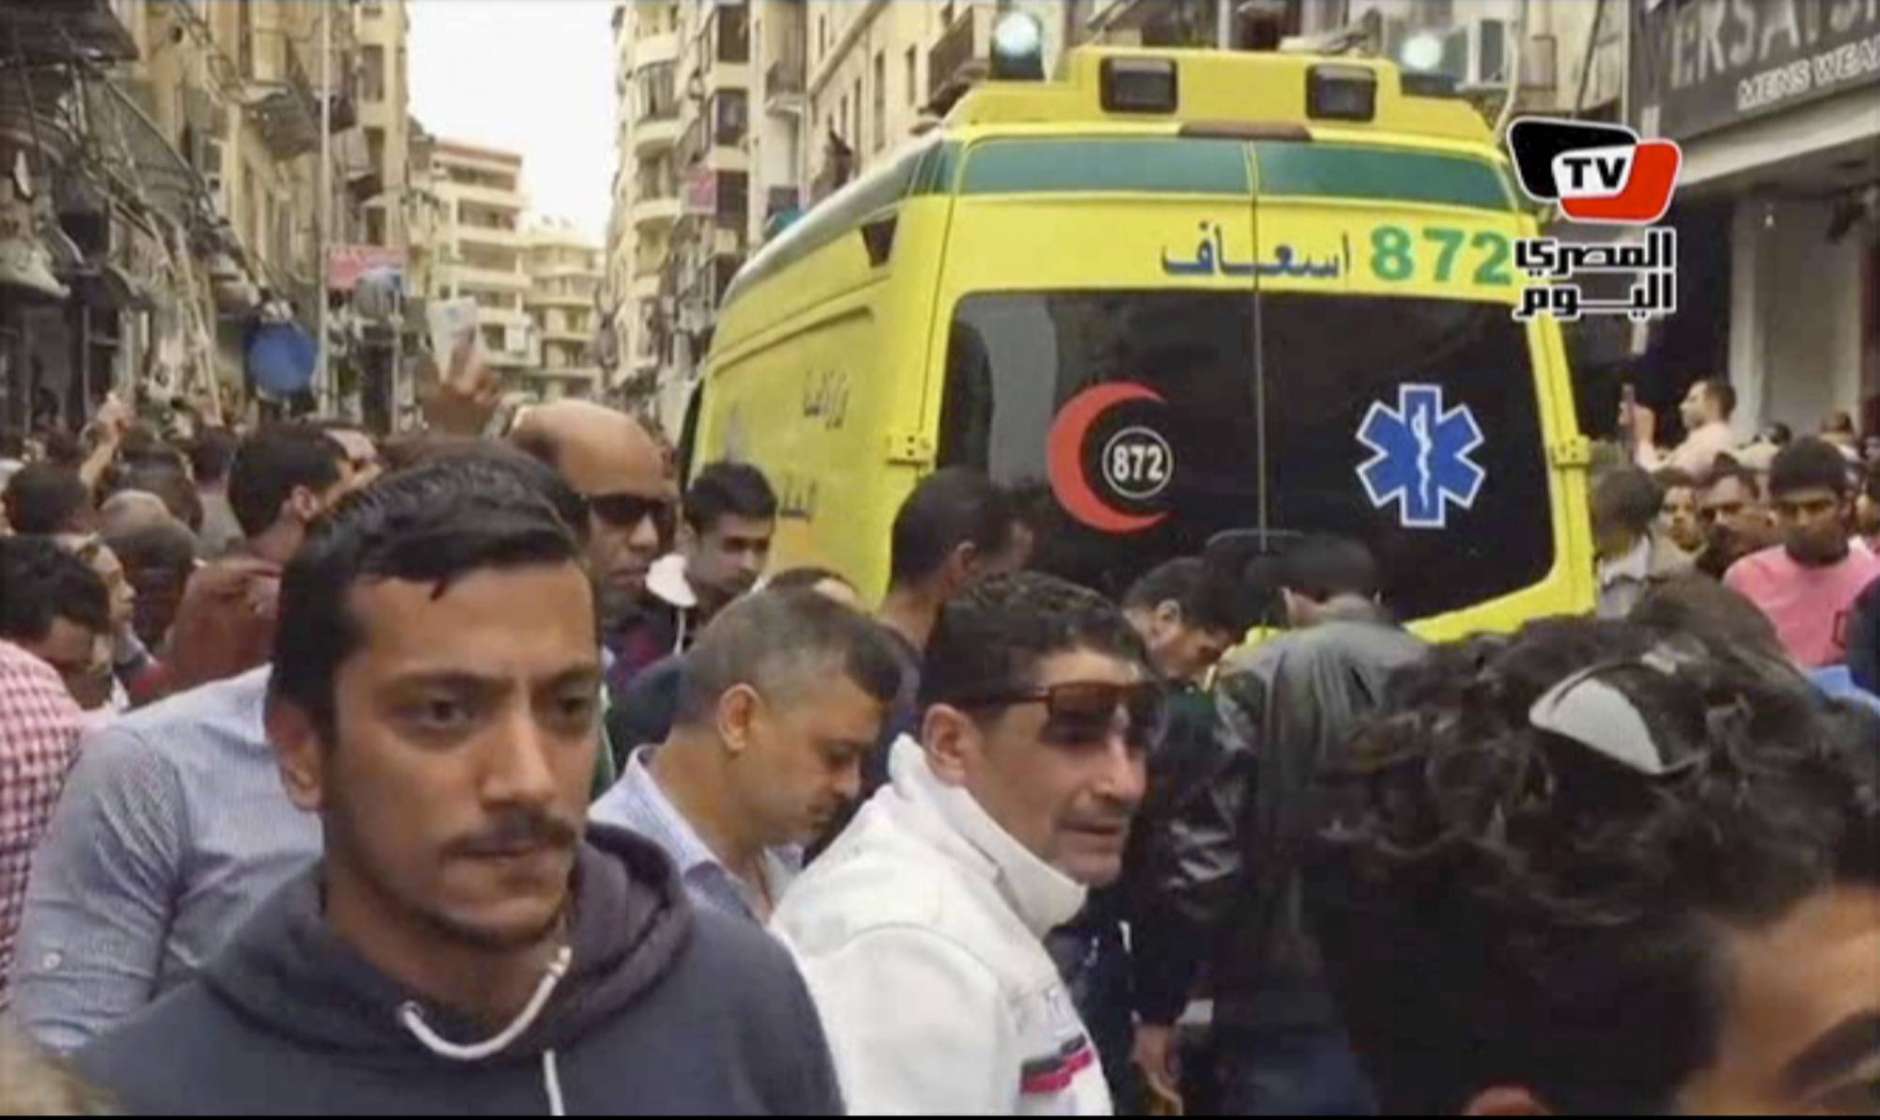 This frame grab from video shows an ambulance outside Saint Mark's Cathedral following a suicide bombing that killed several people, just after Coptic Pope Tawadros II finished services, in the coastal city of Alexandria, Egypt, Sunday, April 9, 2017. Bombs tore through two Egyptian churches in different cities as worshippers were marking Palm Sunday, both claimed by the Islamic State group. (AL-MASRY AL-YOUM, via AP)